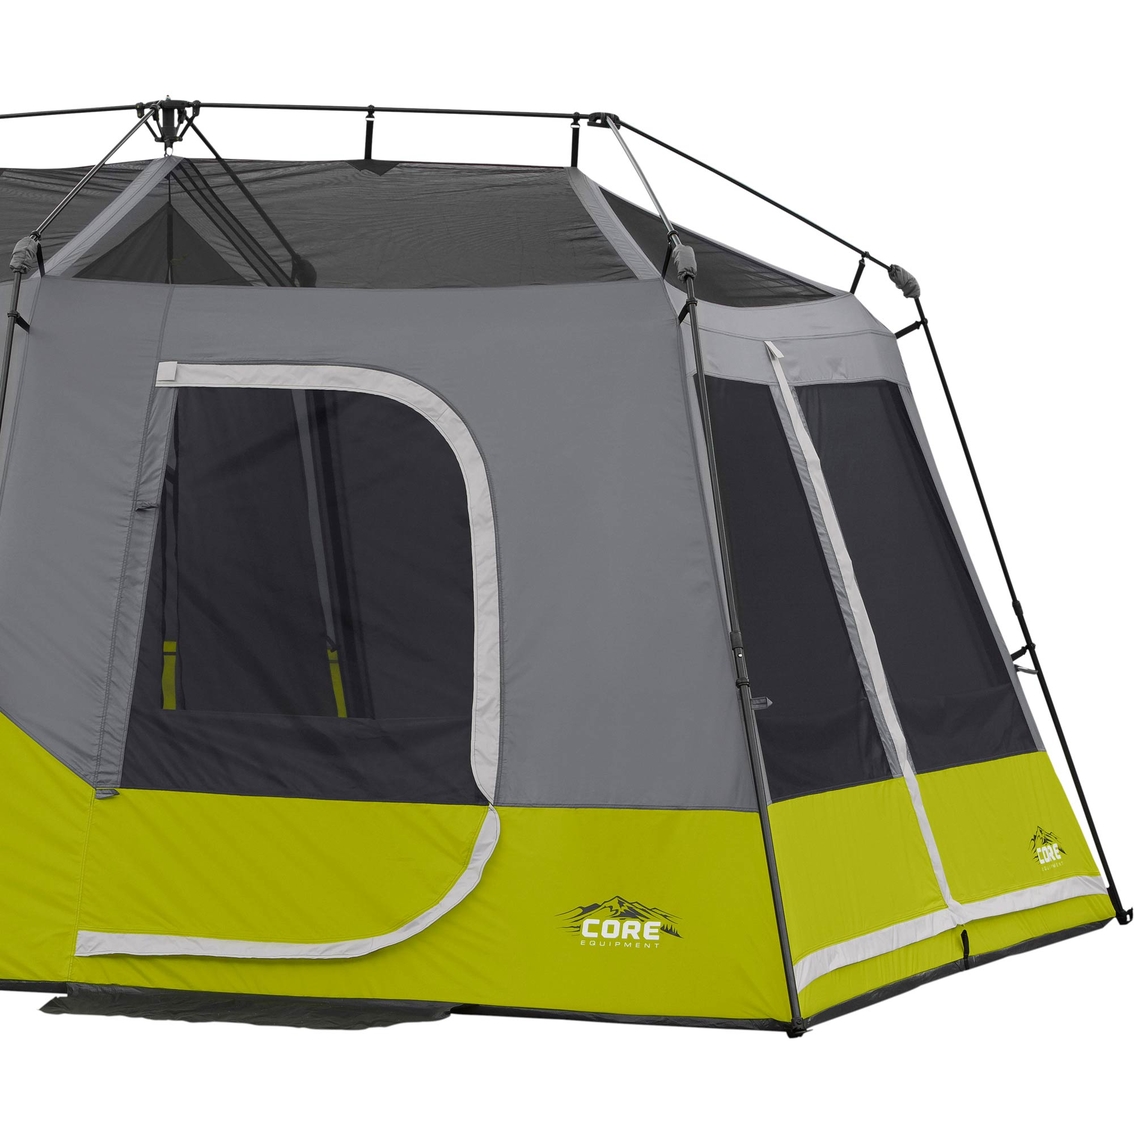 Core Equipment 9 Person Instant Cabin Tent - Image 5 of 10